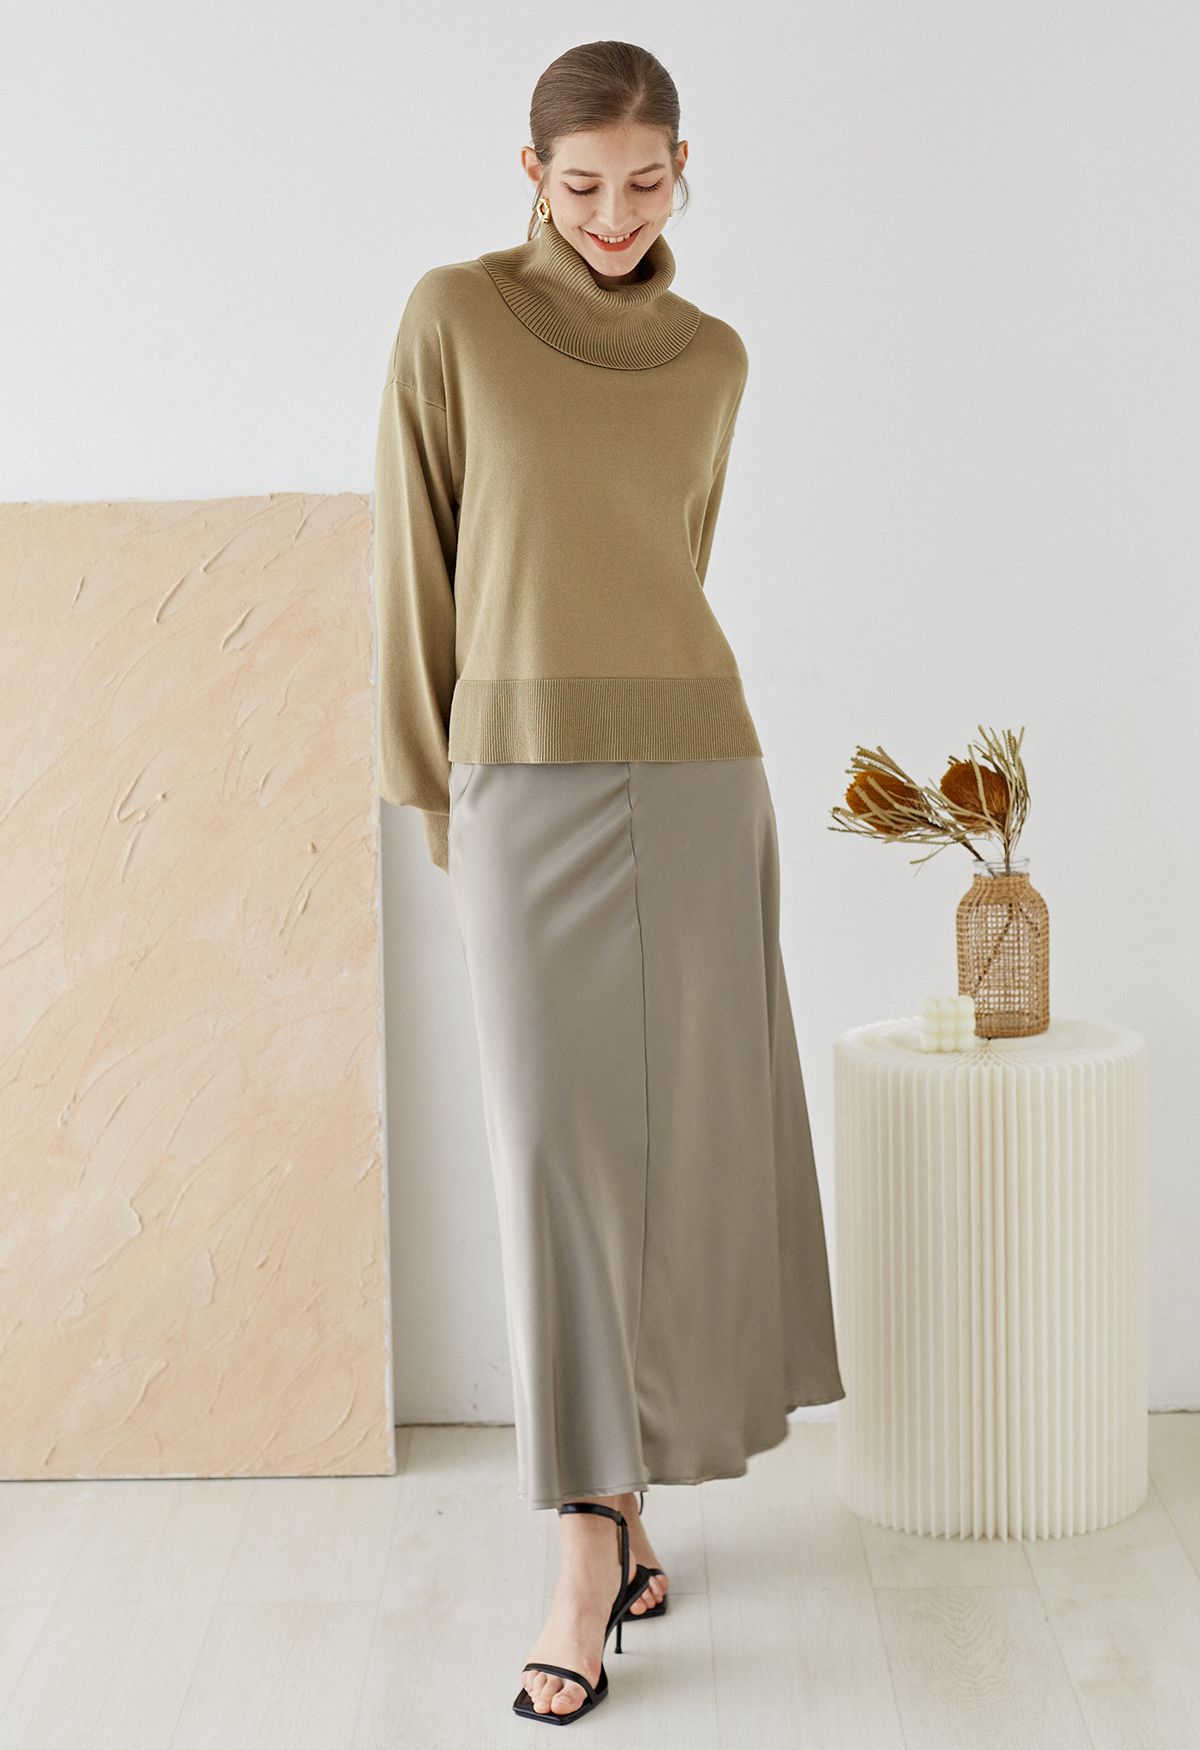 Turtleneck Side Buttons Slouchy Knit Top in Khaki